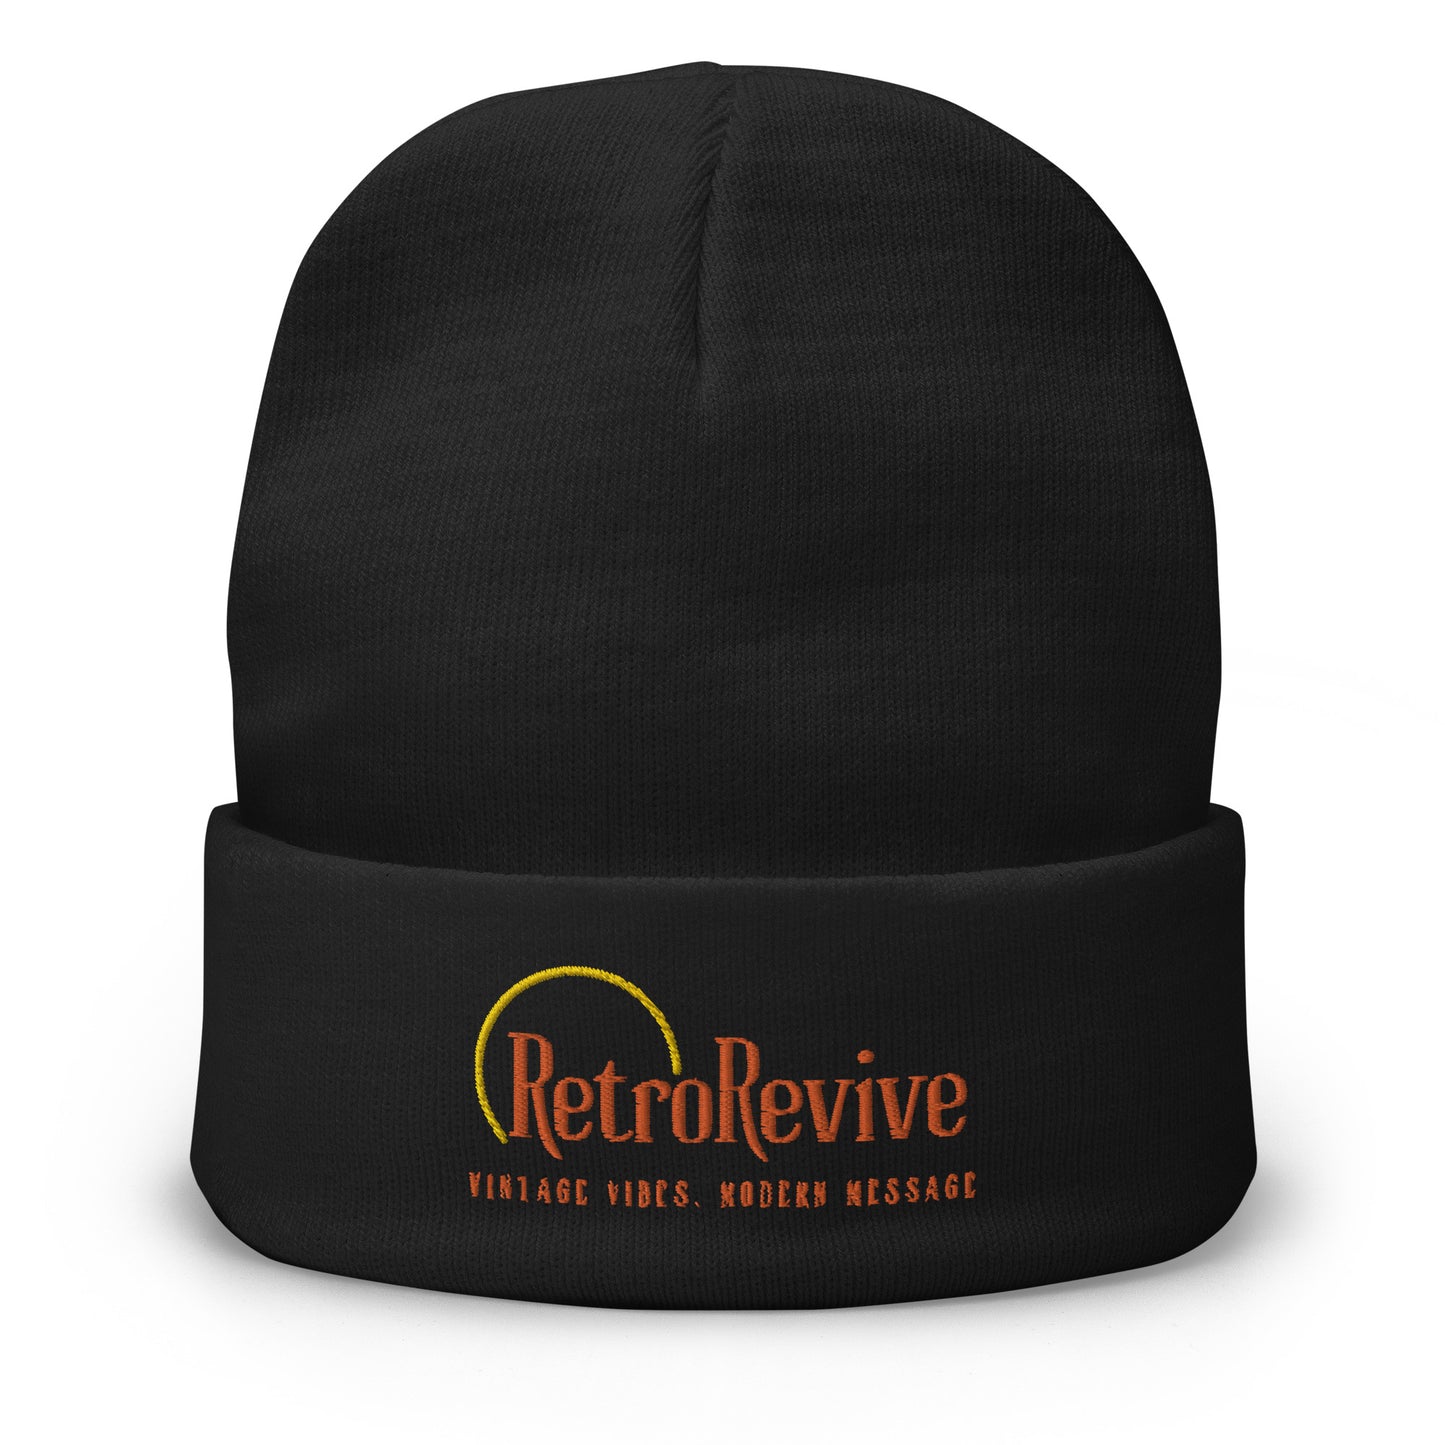 RetroRevive "Vintage Vibes, Modern Message" Embroidered Beanie